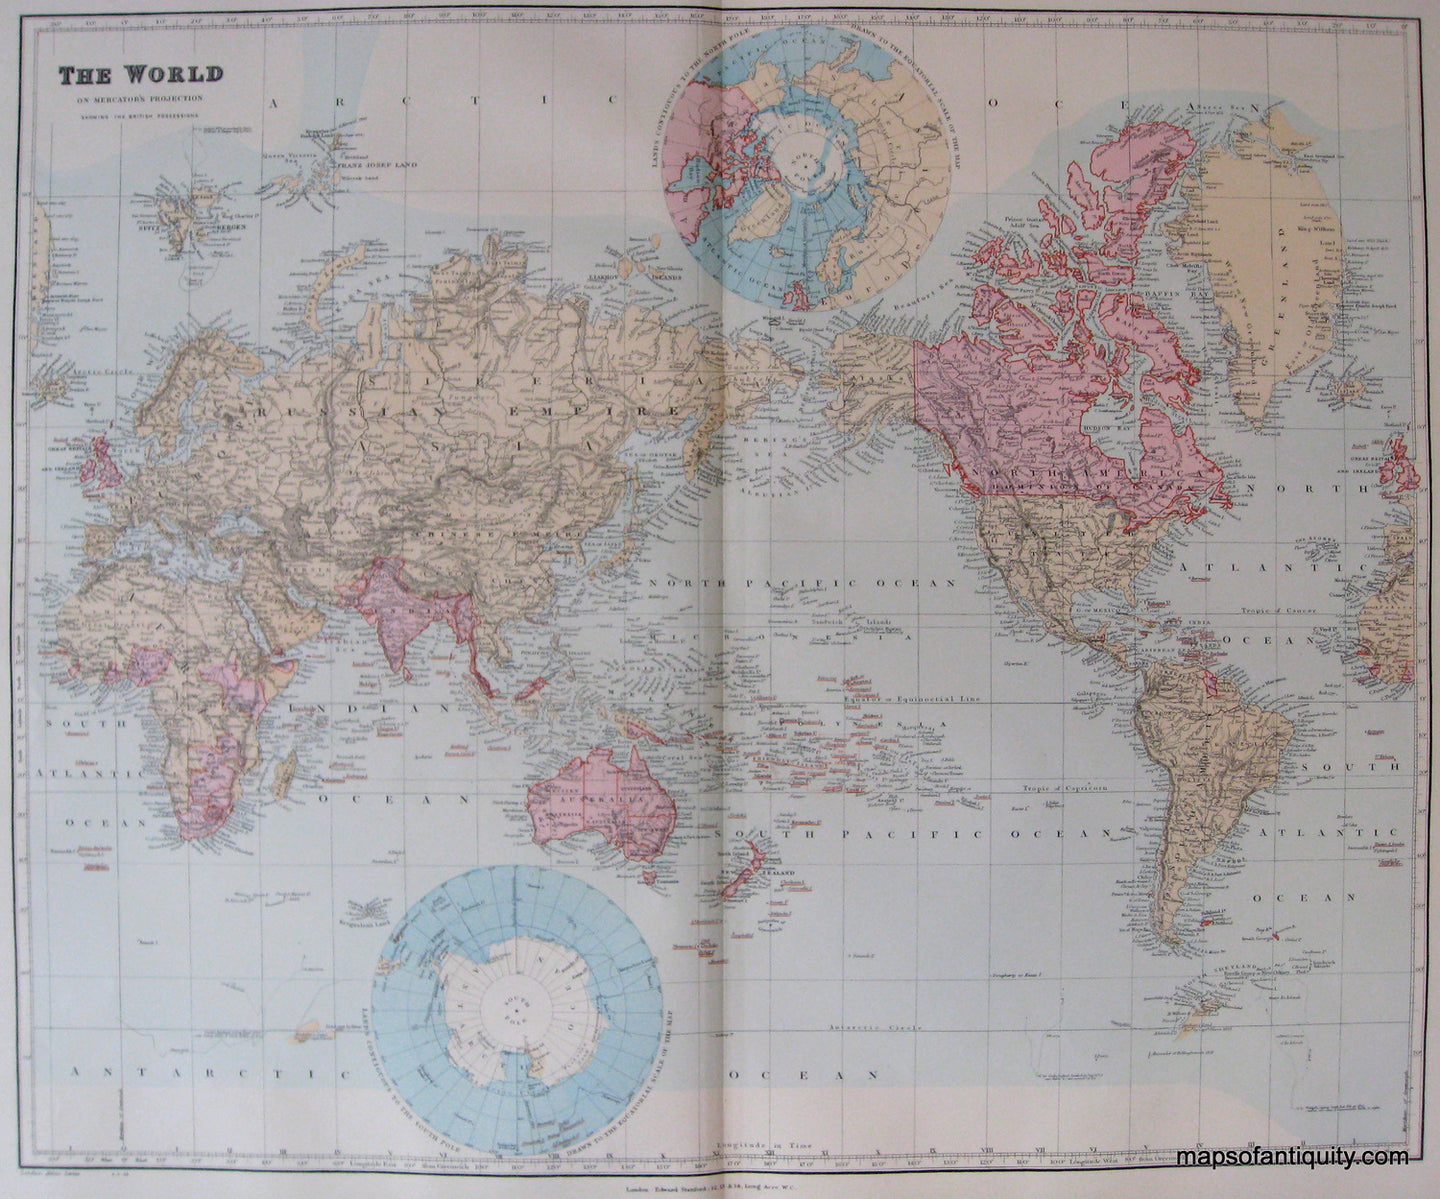 '-The-World-on-Mercator's-Projection-Showing-the-British-Possessions-**********-World-World-1904-Stanford-Maps-Of-Antiquity